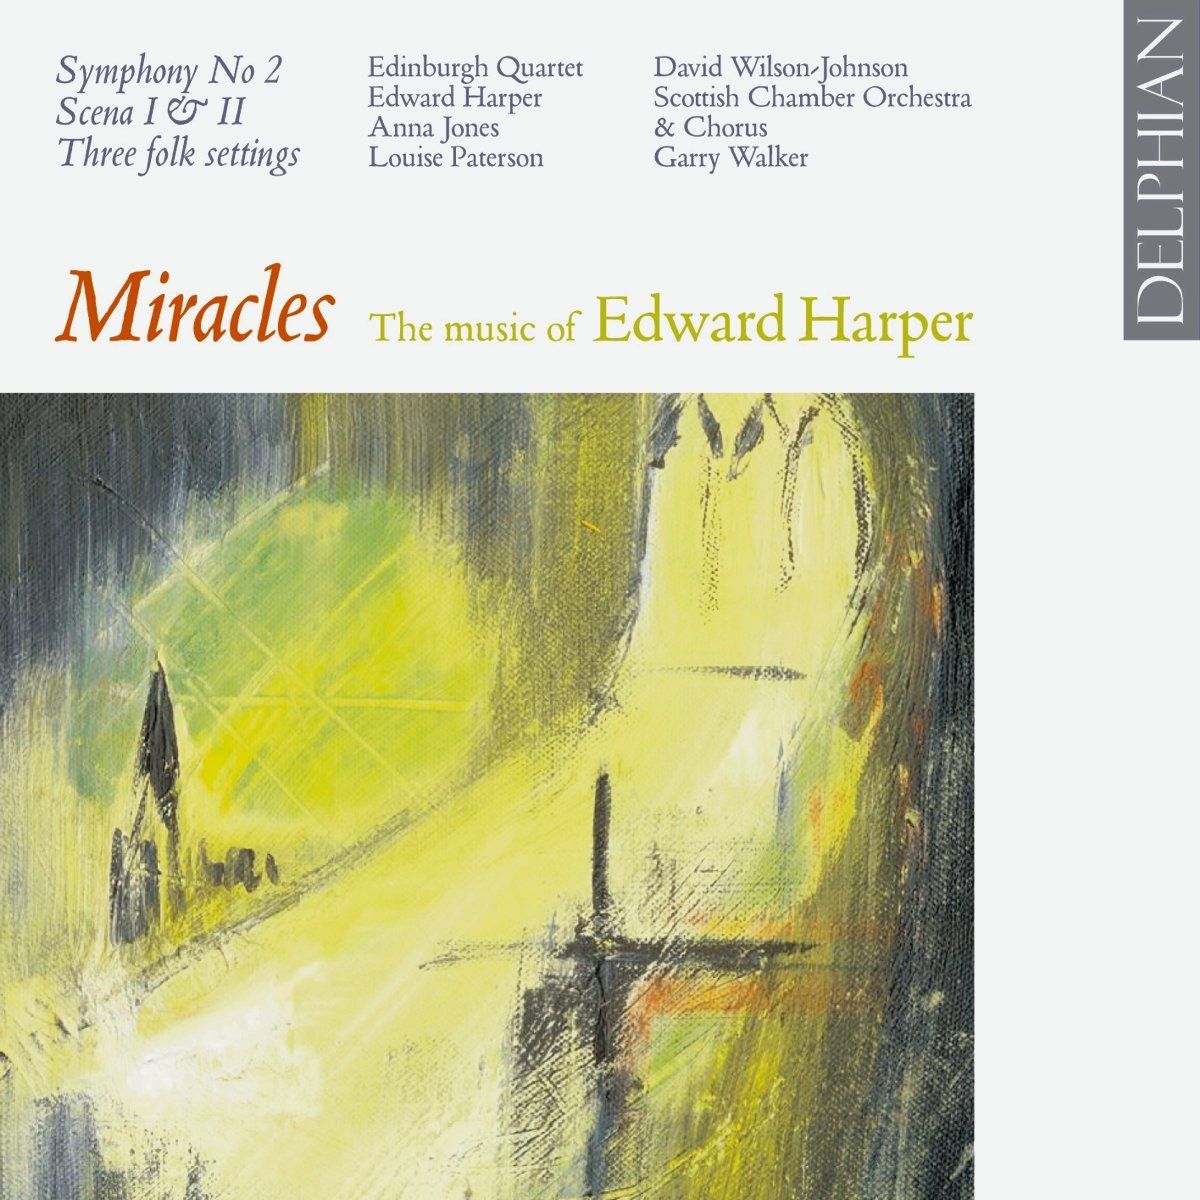 Miracles: The music of Edward Harper